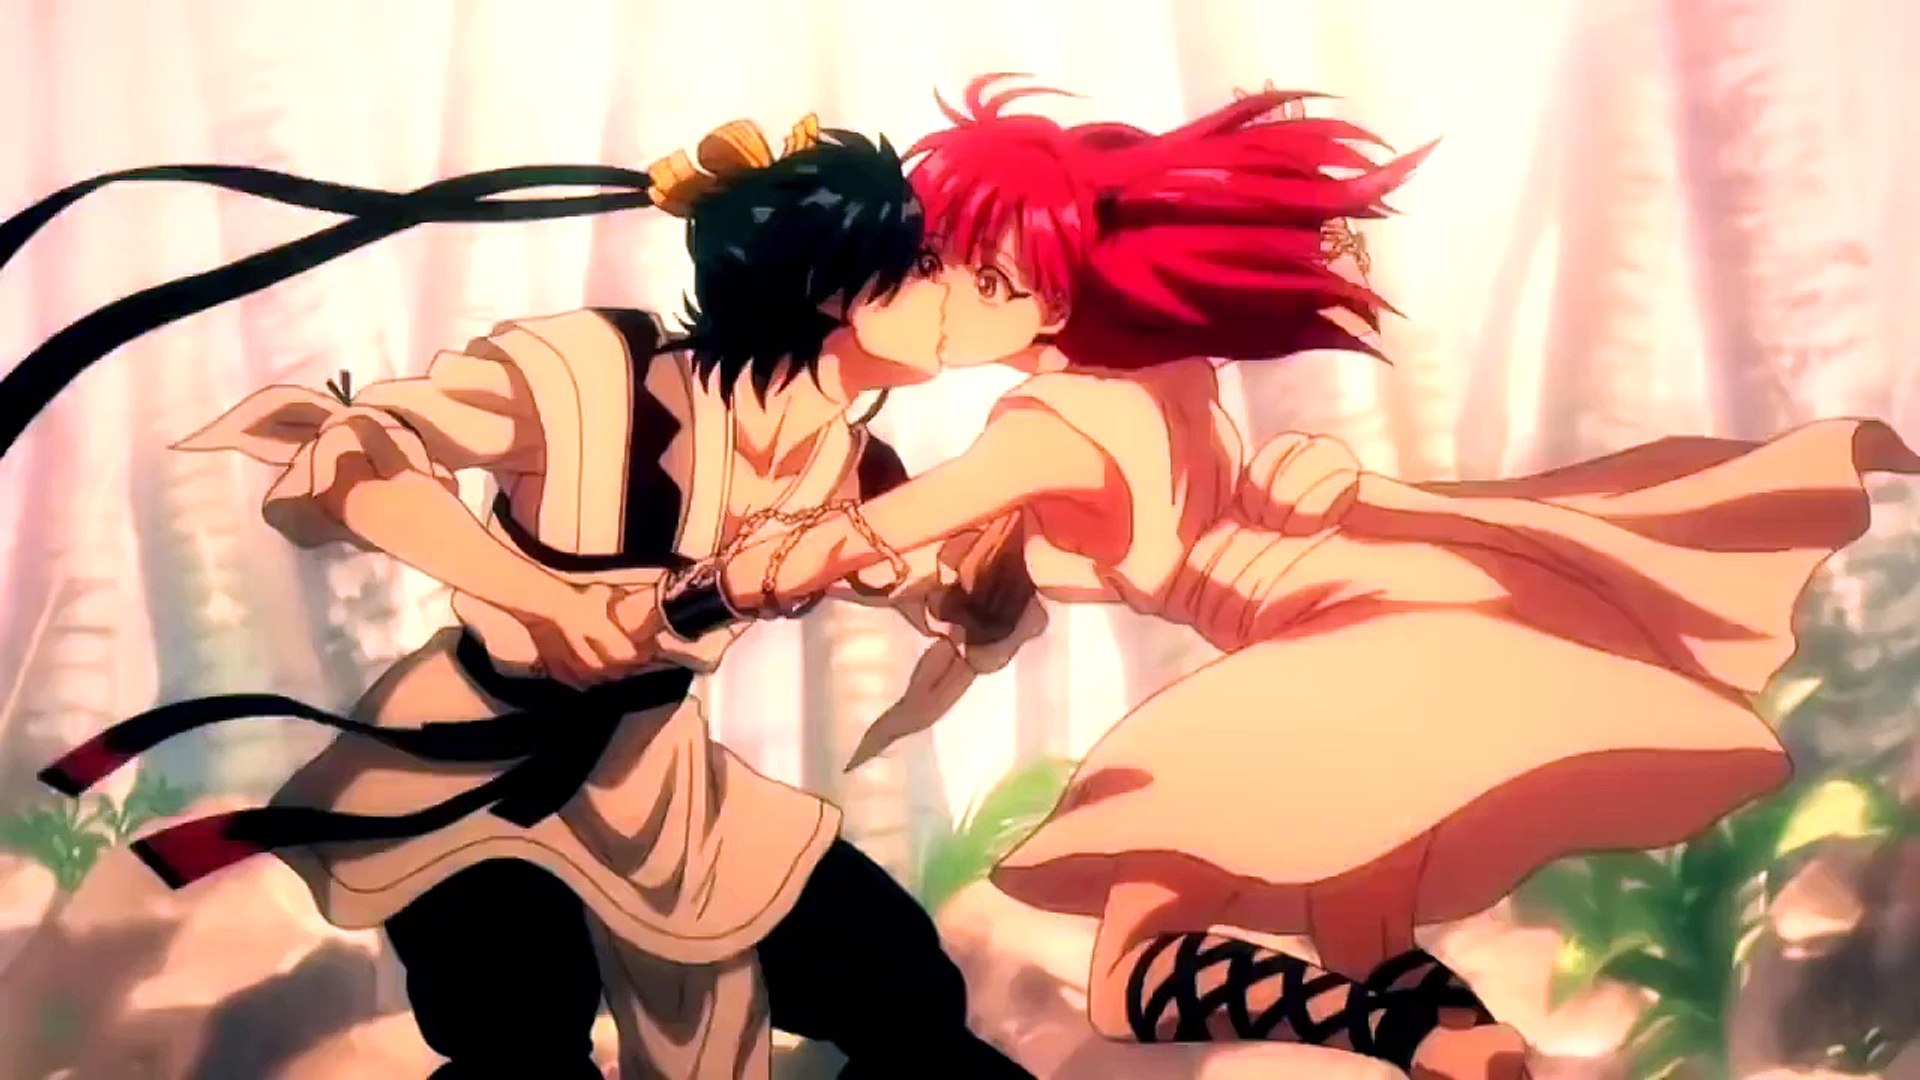 ♥ ANIME KISSING SCENE COMPILATION ♥ [HD] - Dailymotion Video